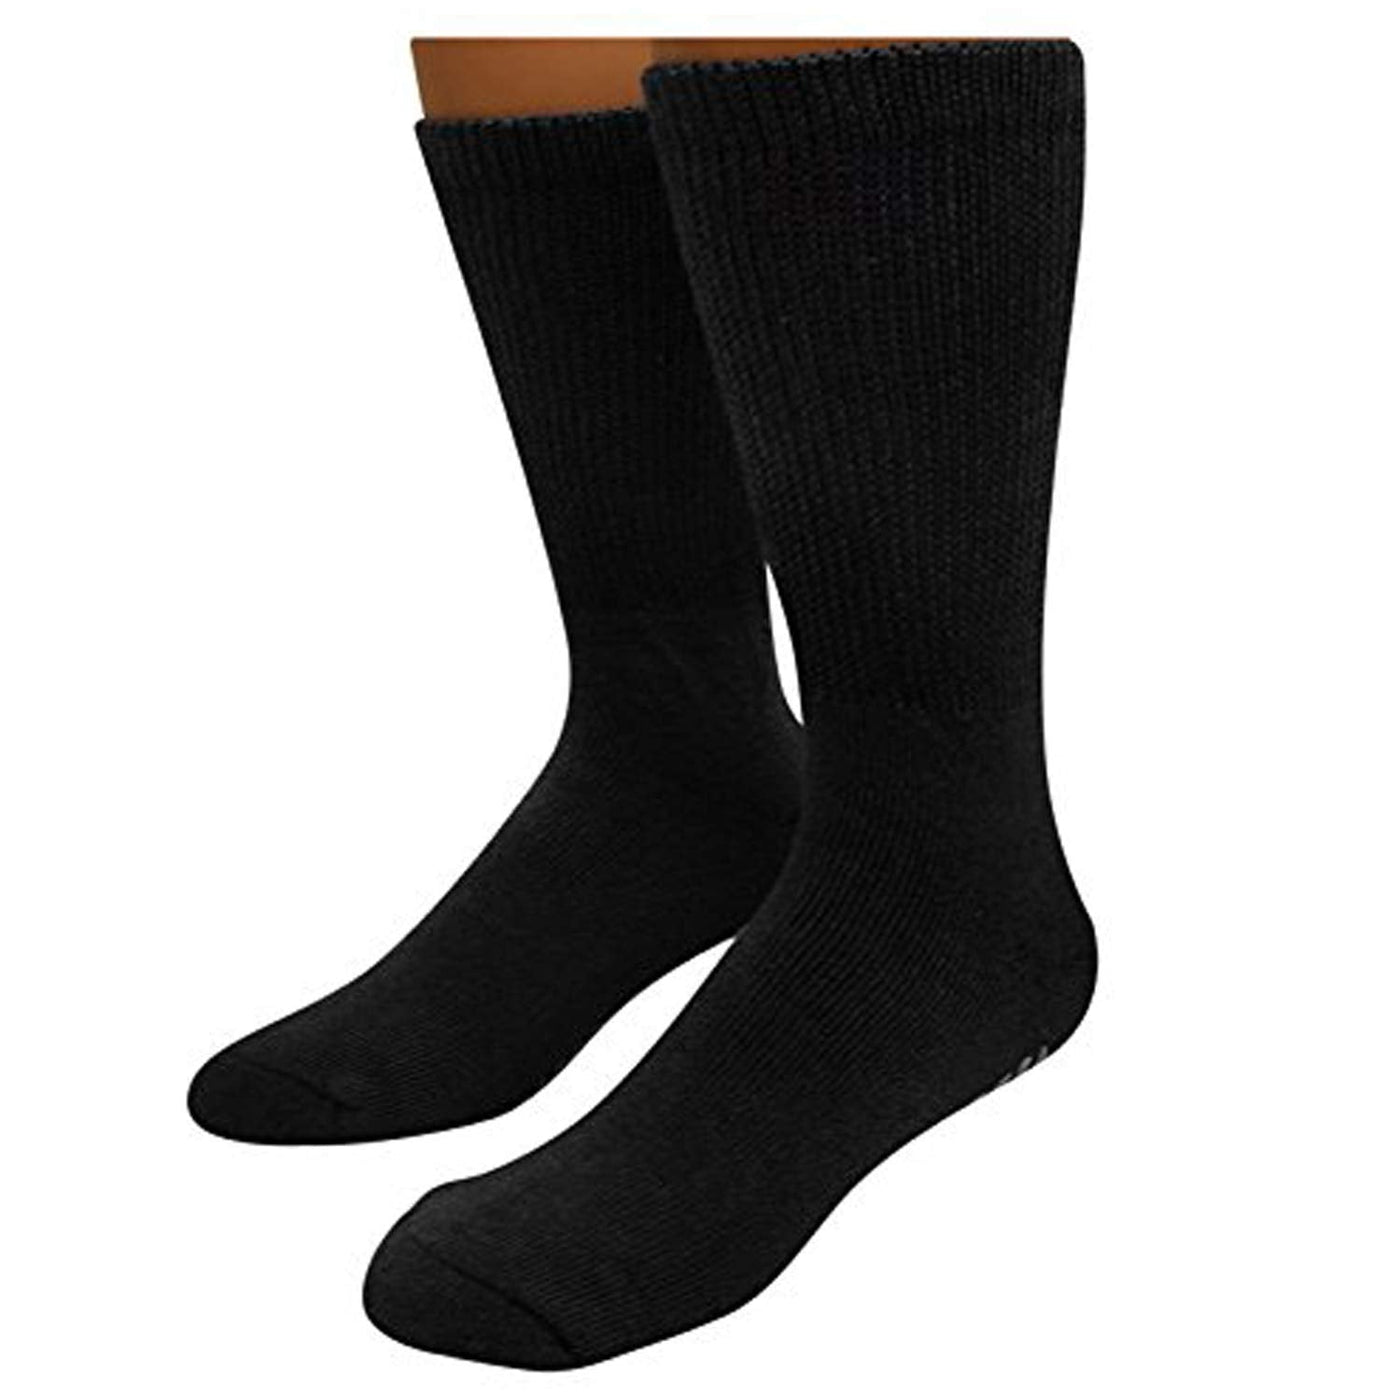 Diabetic Non Skid Hospital Slipper Socks (6-Pack) - Noble's Health Care Products Solutions